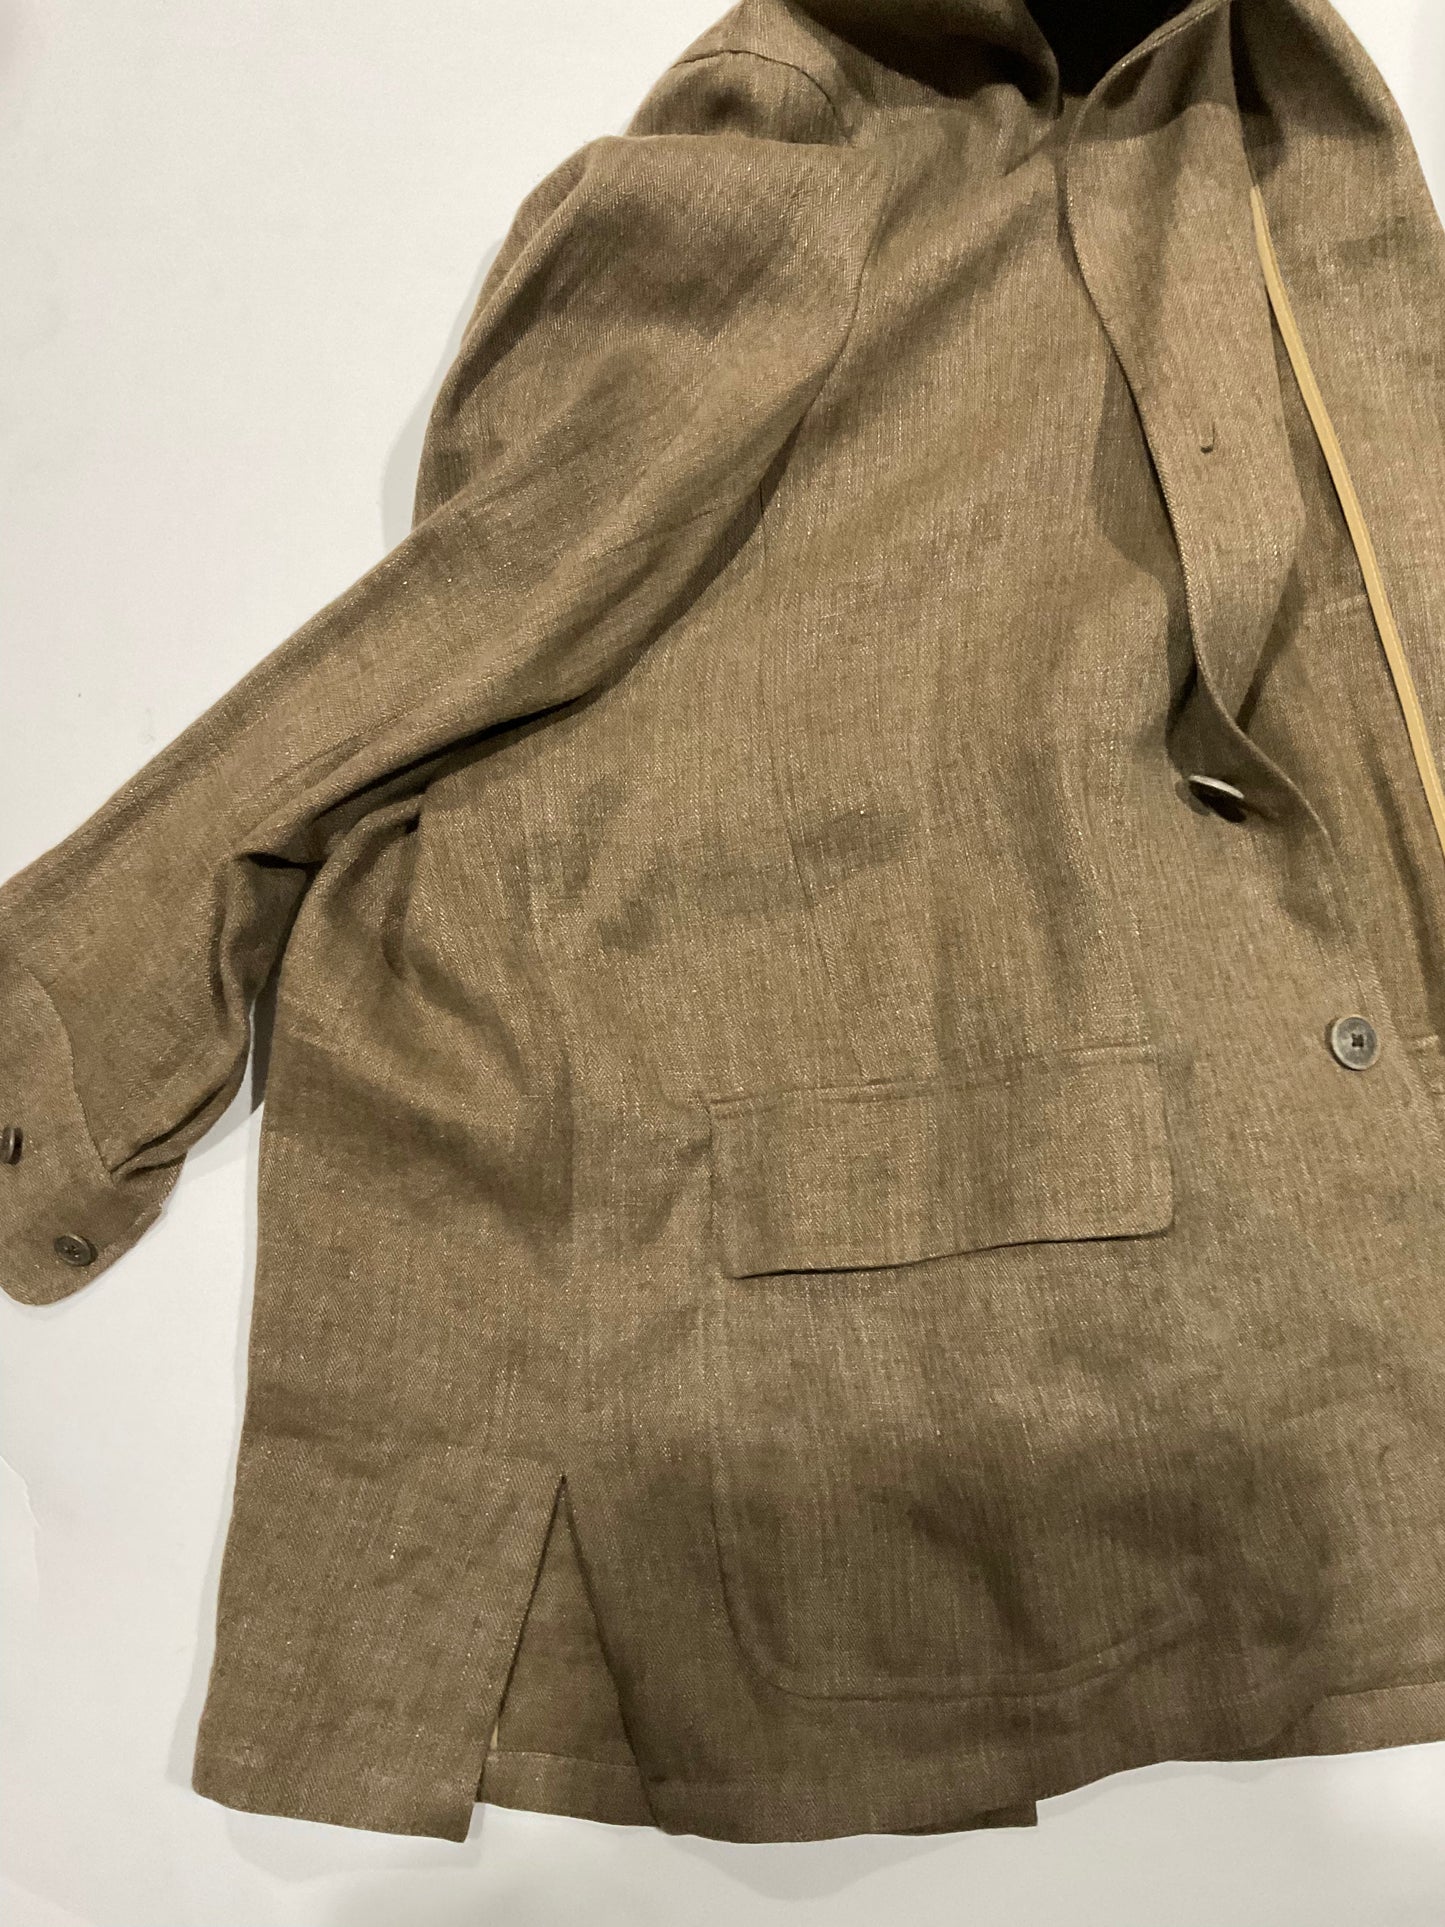 R P SUIT / OLIVE LINEN / UNCONSTRUCTED / MEDIUM - LARGE / MADE IN USA